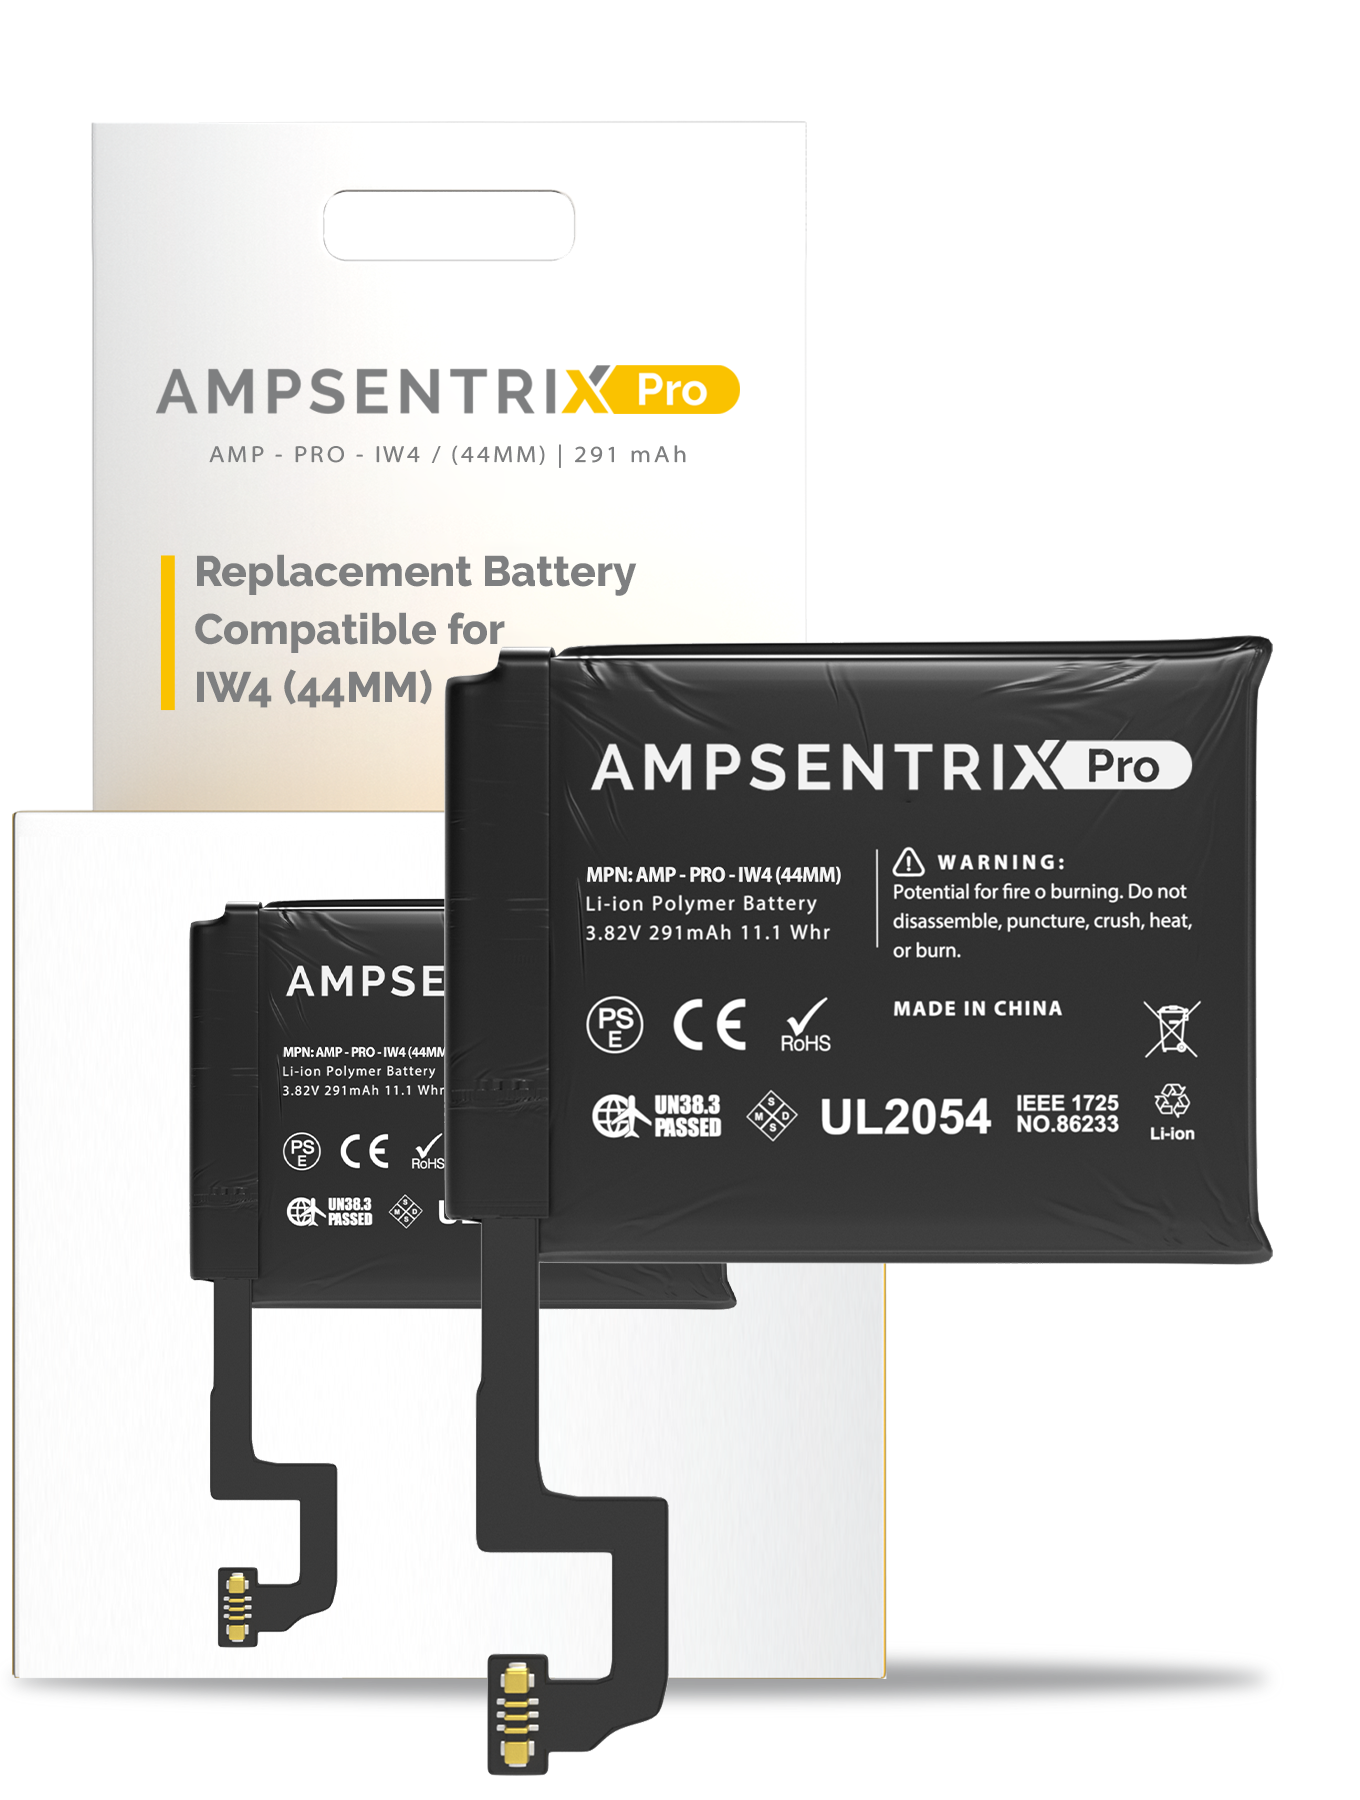 Replacement Battery Compatible For Watch Series 4 (44MM) (AmpSentrix Pro)